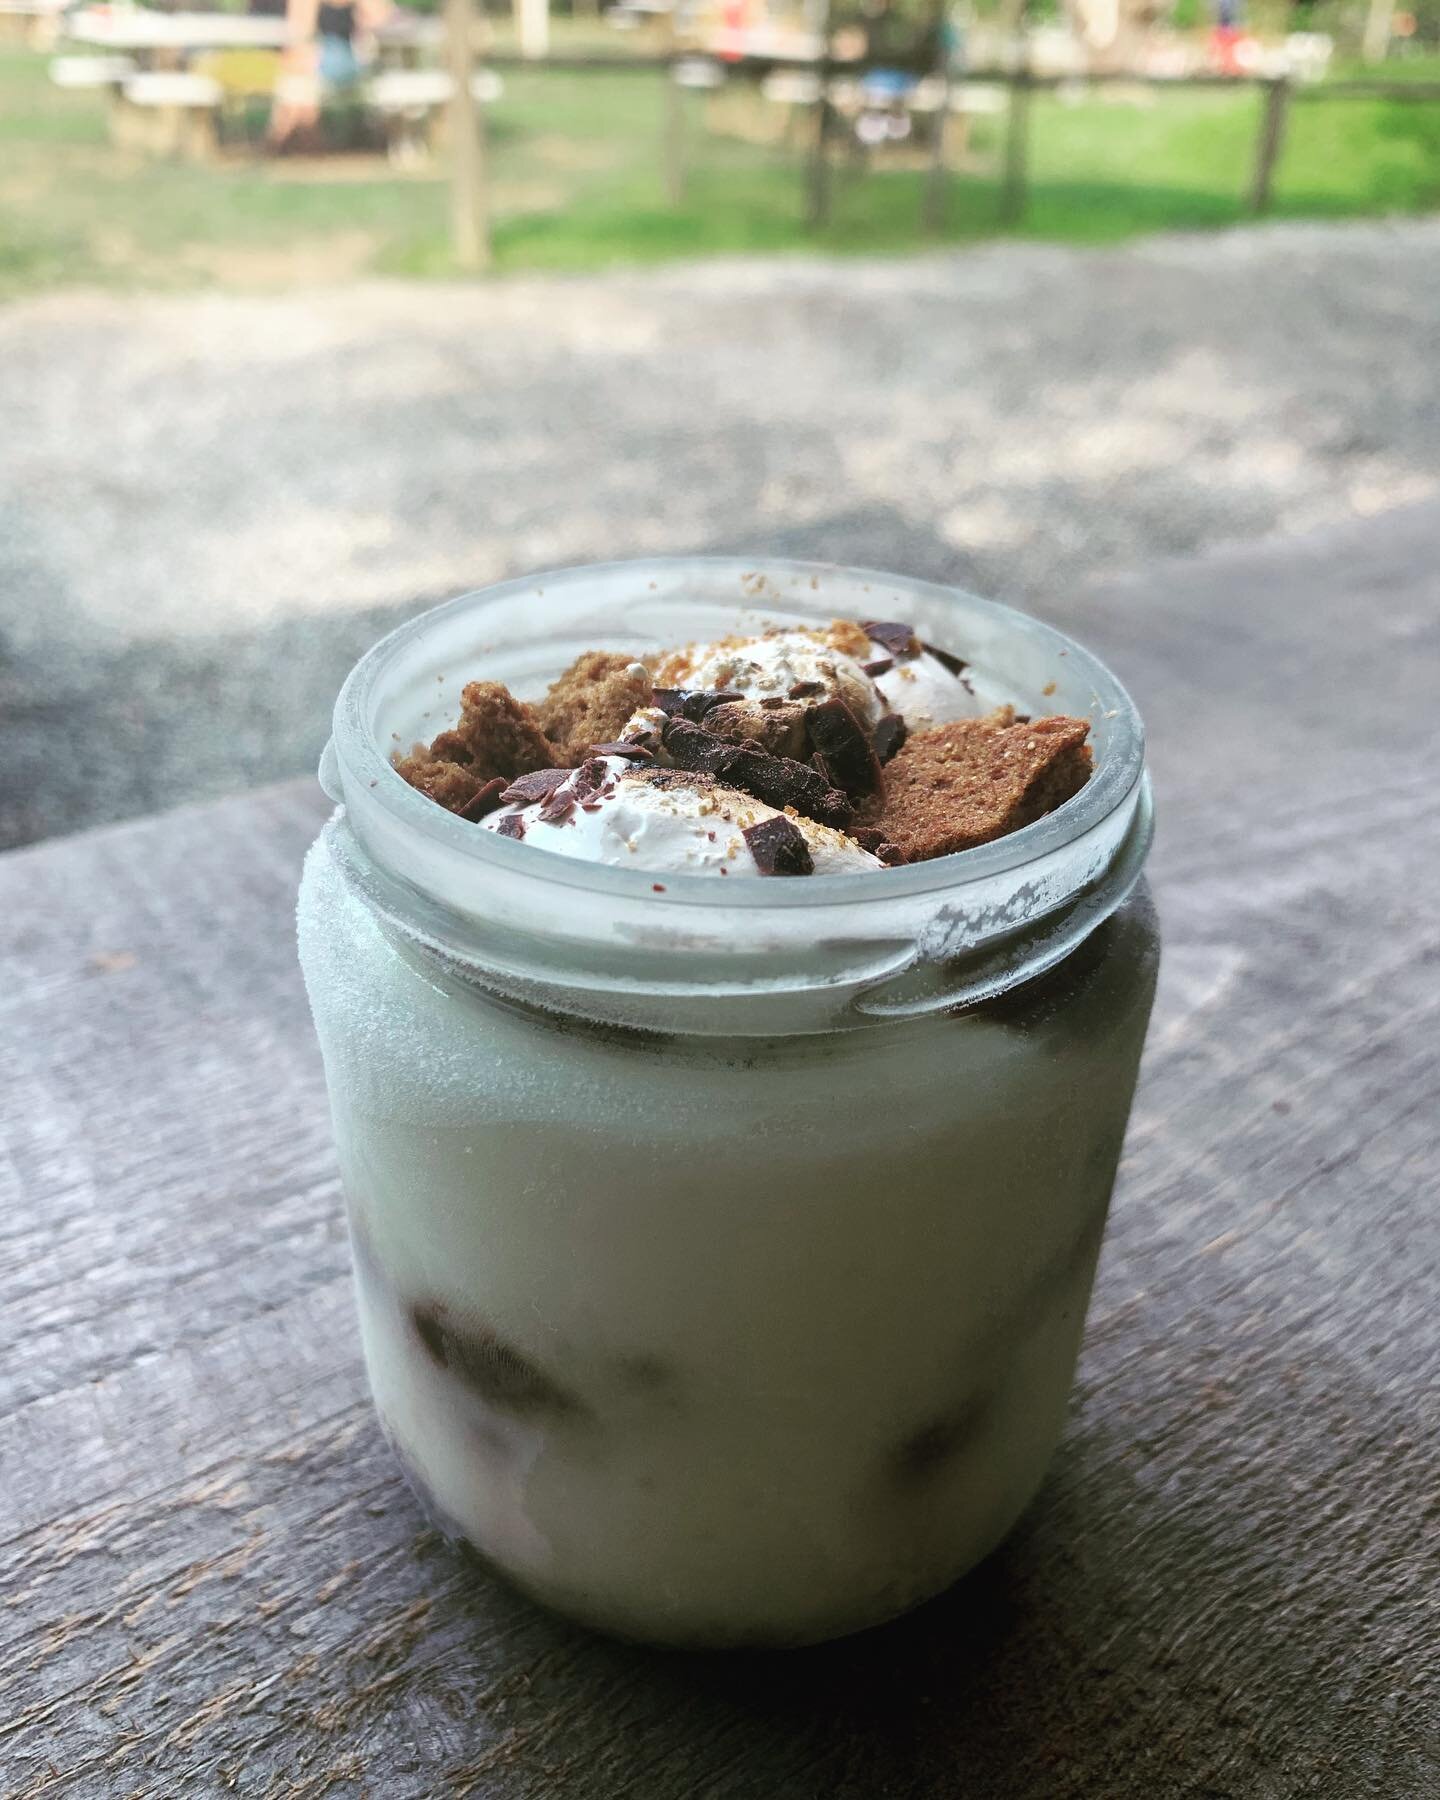 Live music tonight at Sunday Cider pairs perfectly with a camp fire ban S&rsquo;more sundae! House made graham cracker, velvety vanilla ice cream, dark chocolate fudge sauce, chopped Callebaut dark chocolate and our lovely scorched marshmallow fluff.